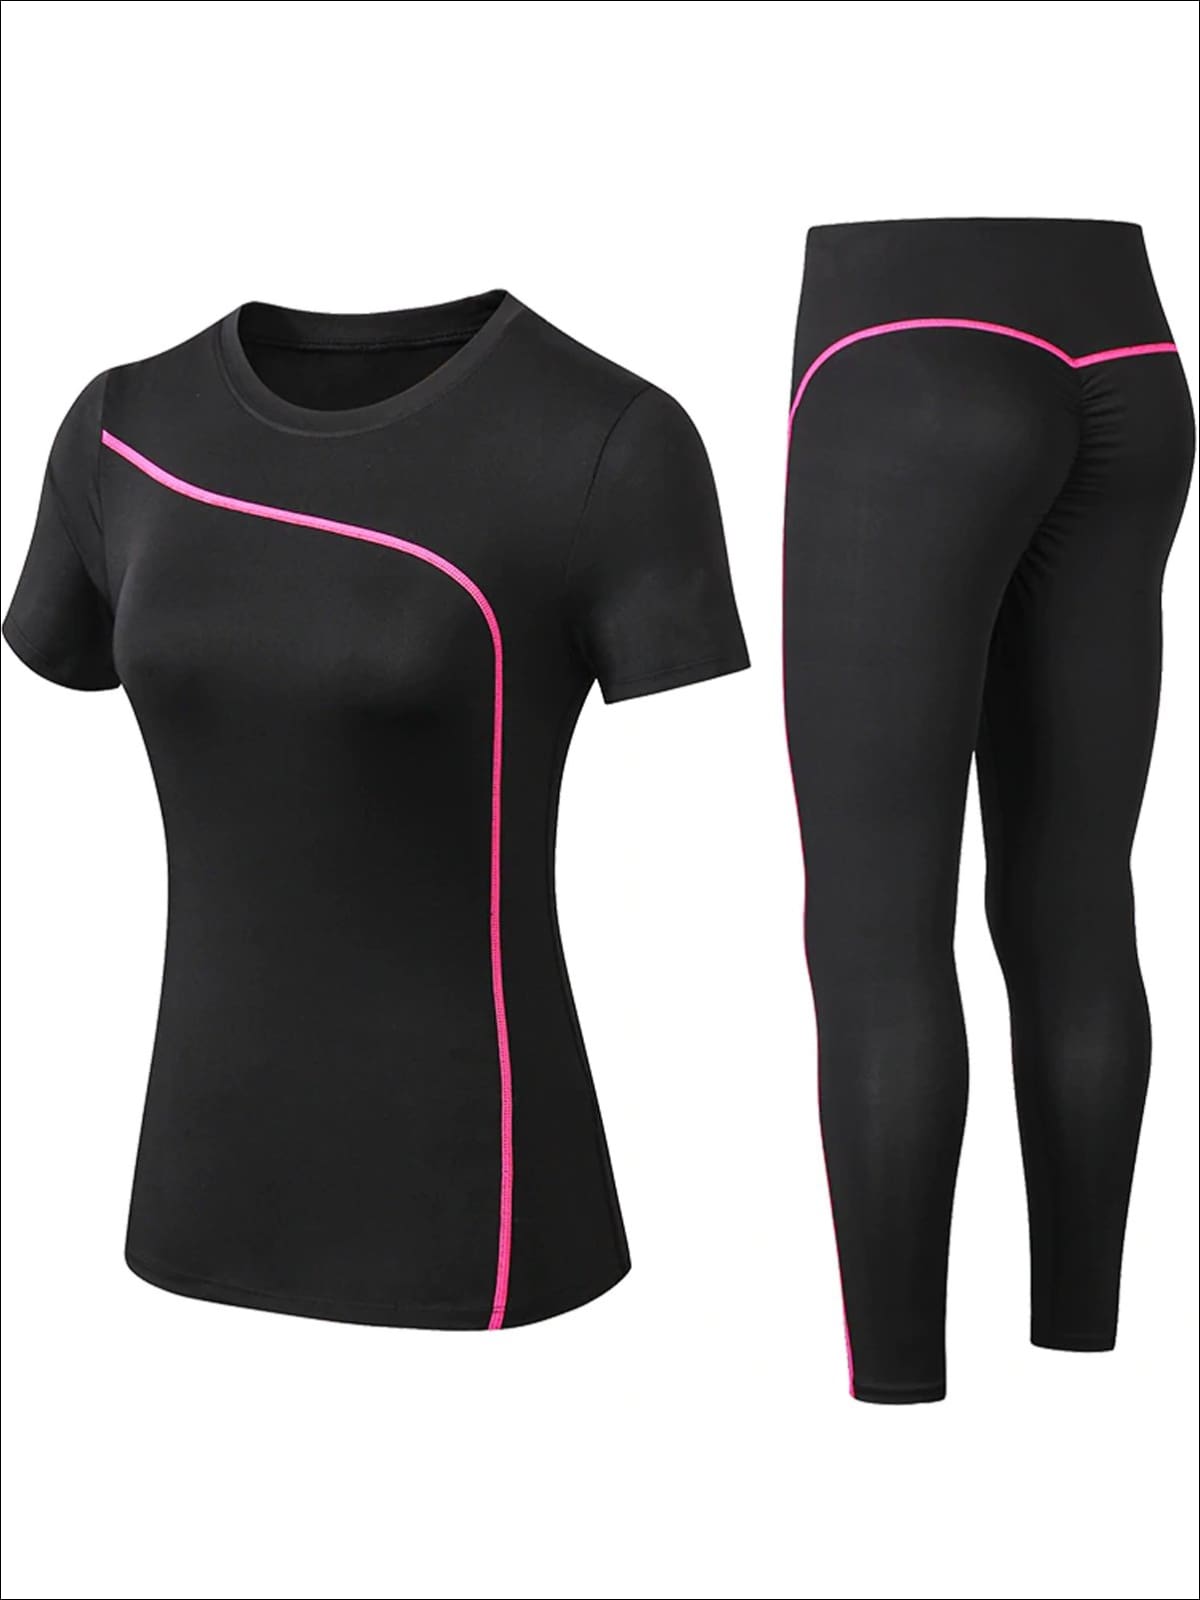 https://cdn.shopify.com/s/files/1/0996/1812/products/womens-black-contrast-piping-workout-top-leggings-set-pink-s-20-39-99-40-59-bfcutoff-dropified-dropshipping-activewear-mia-belle-overseas-fulfillment-baby_617.jpg?v=1577276019